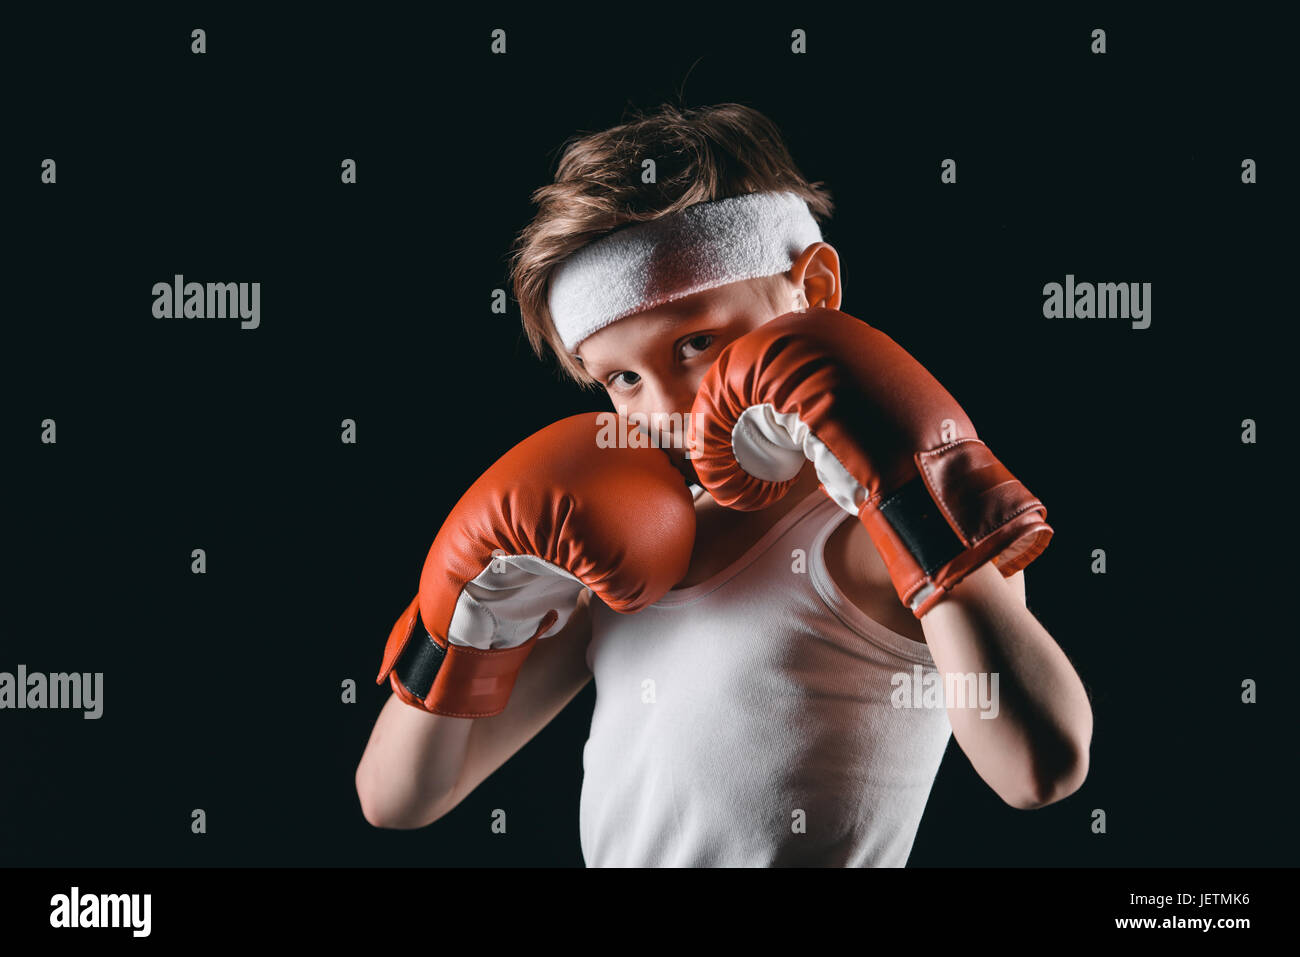 boy obscuring face with boxing gloves isolated on black, active kids concept Stock Photo